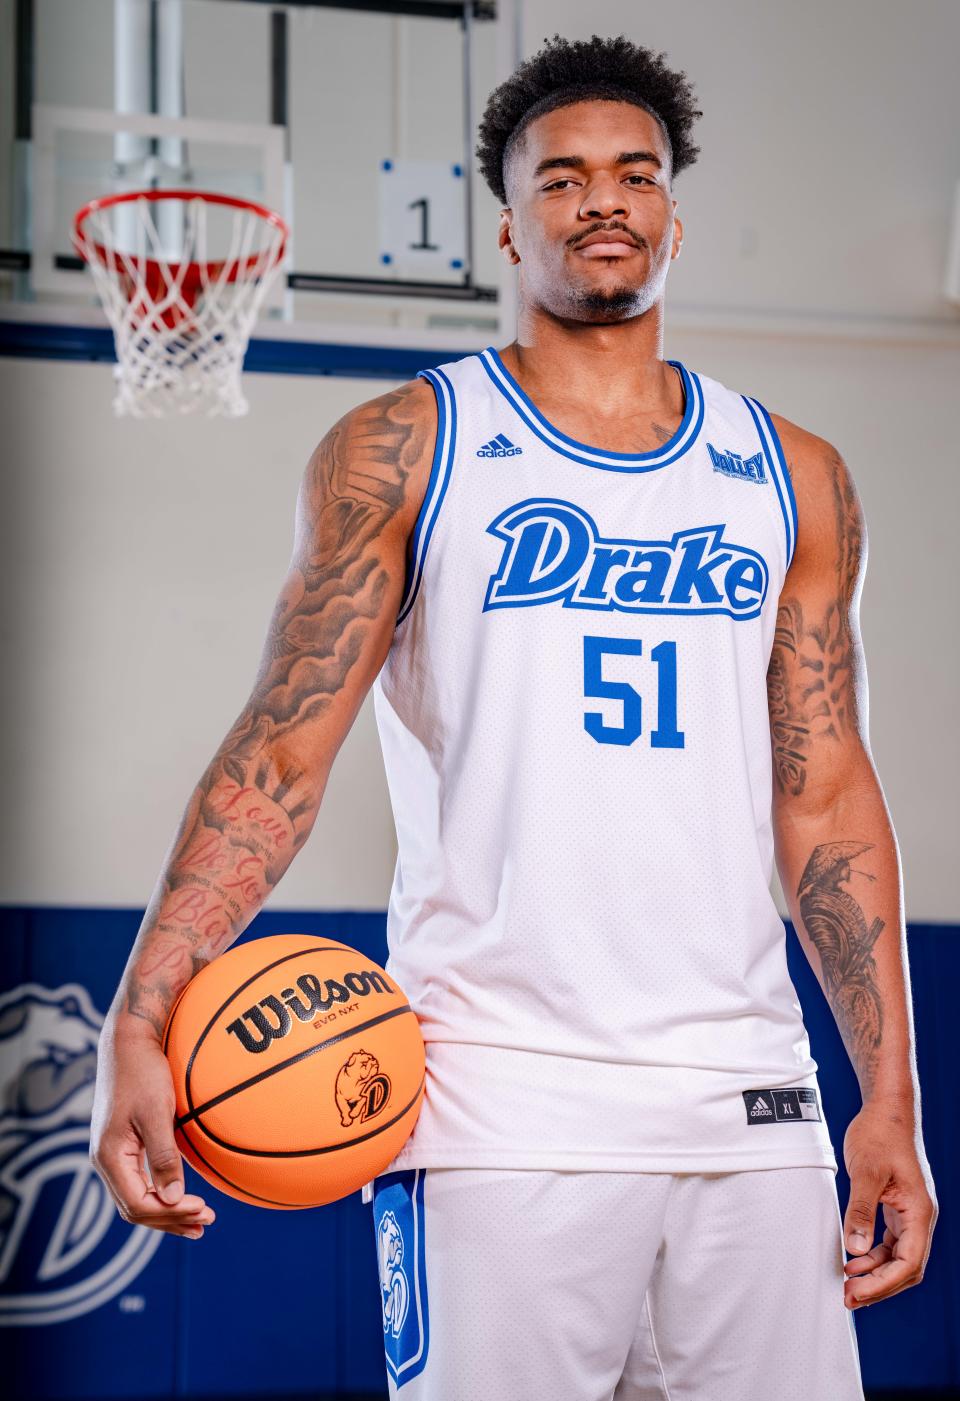 Drake forward Darnell Brodie is starting his fourth season with the Bulldogs.